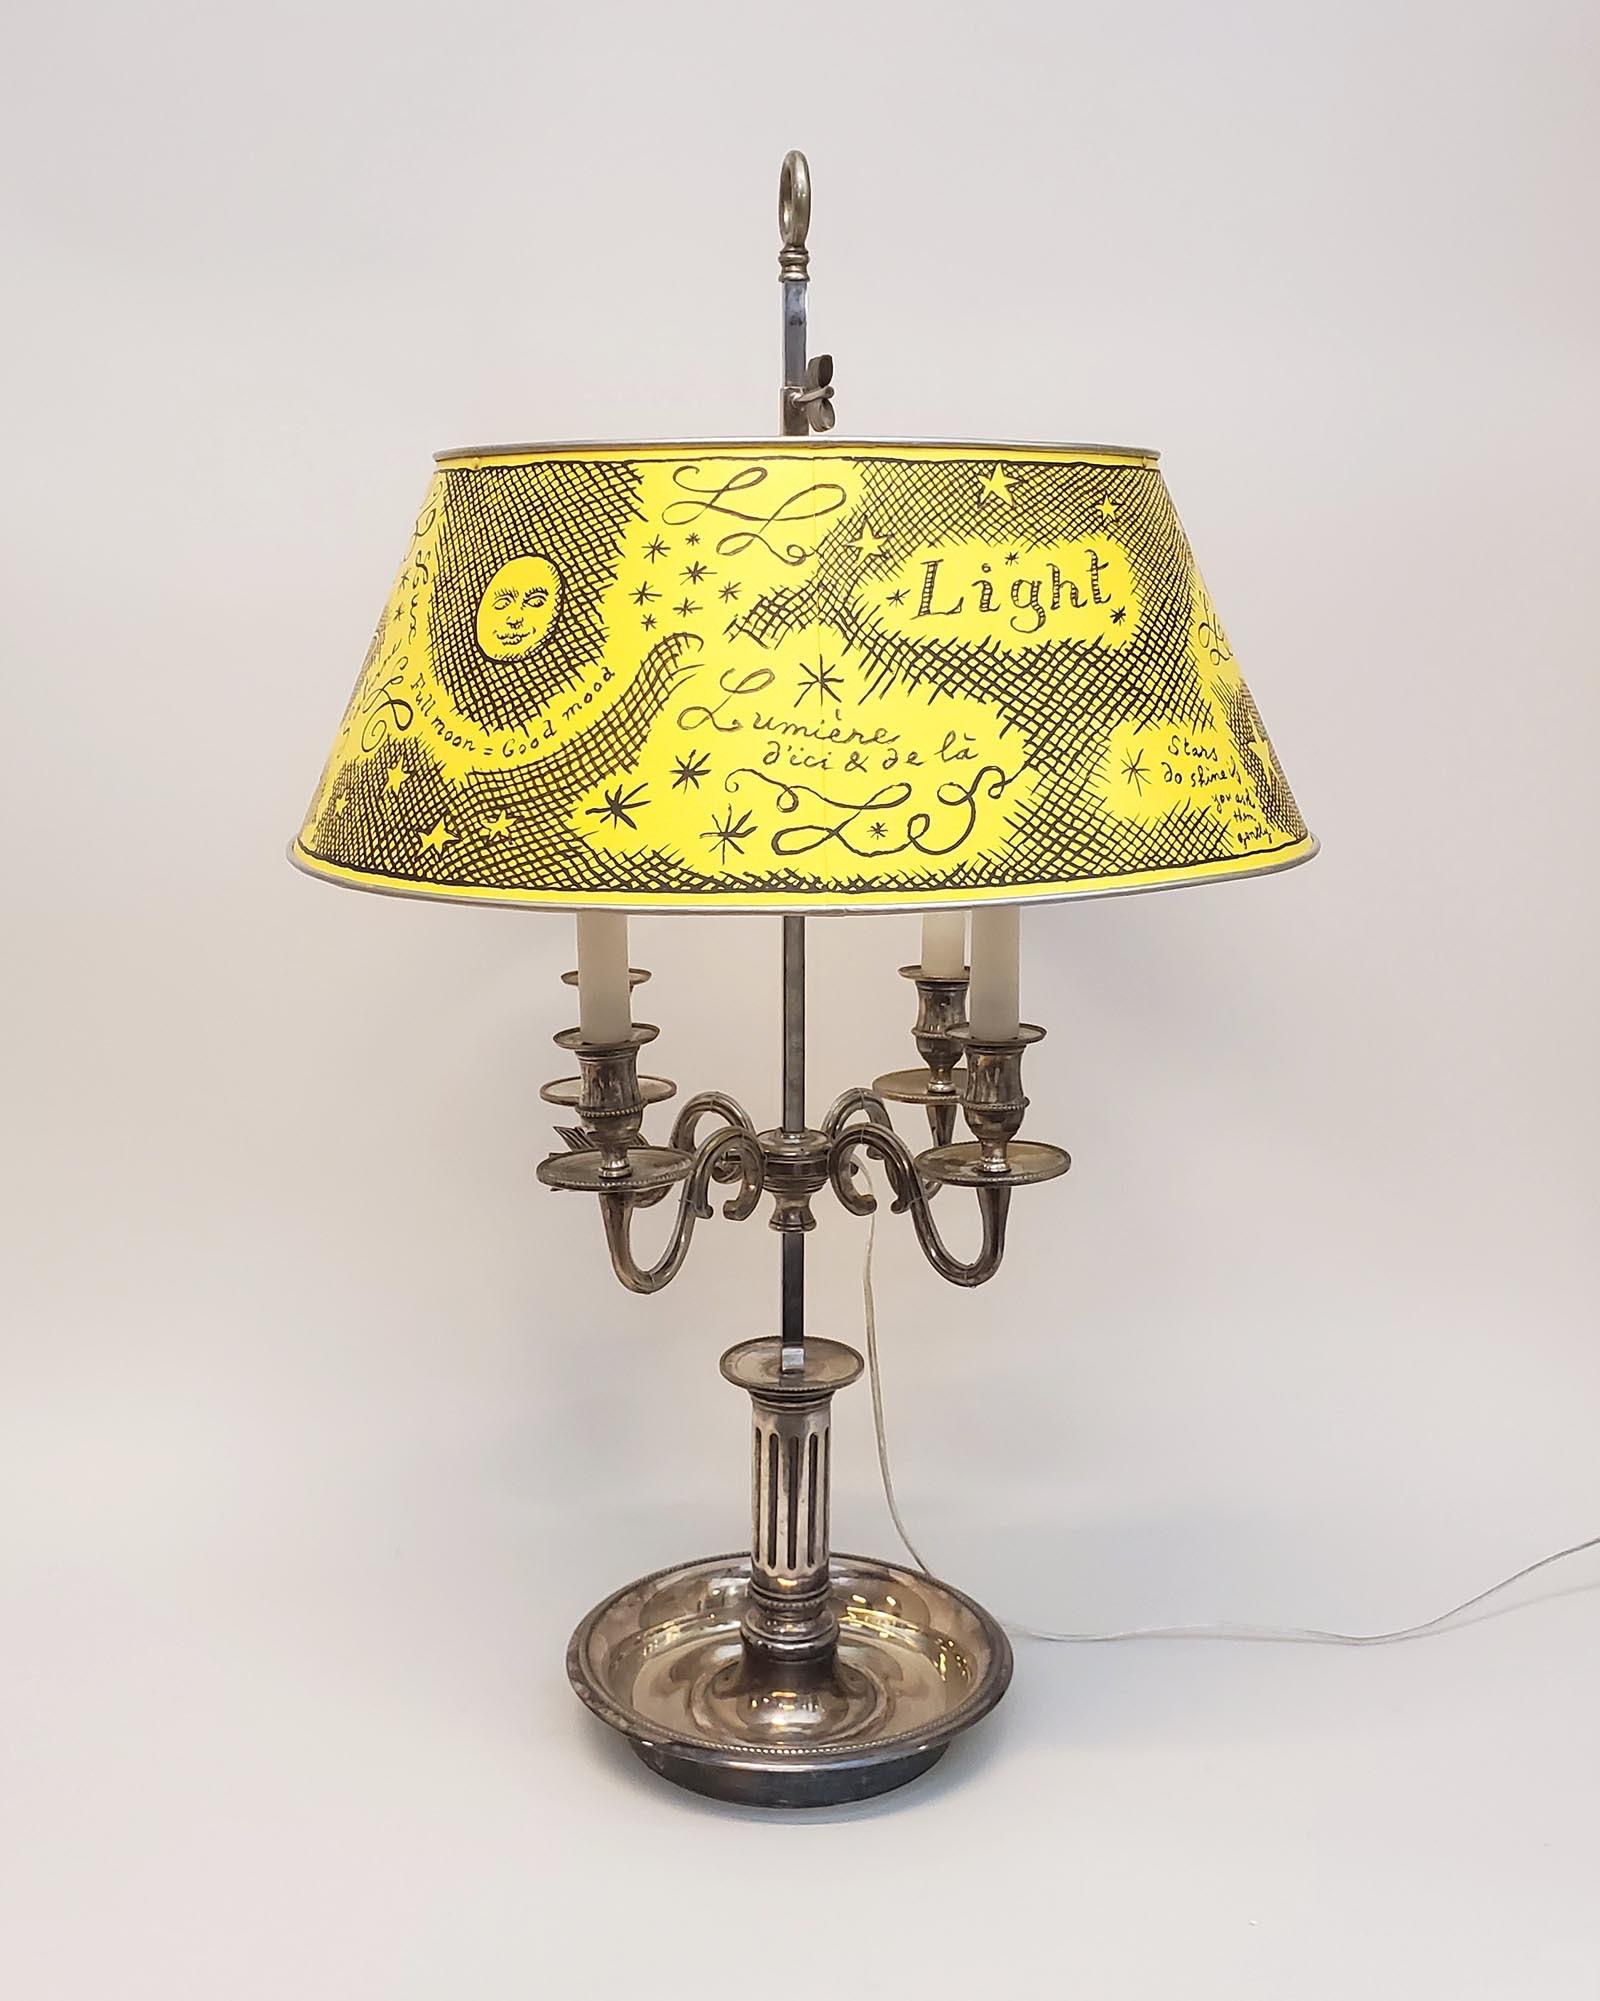 The artist Pierre Le-Tan painted the shade of this antique lamp with words for light in English, French, Latin, Italian, and German – lumière, lux, luce, licht. Being a world-traveler, he spoke a smattering of European languages, in addition to